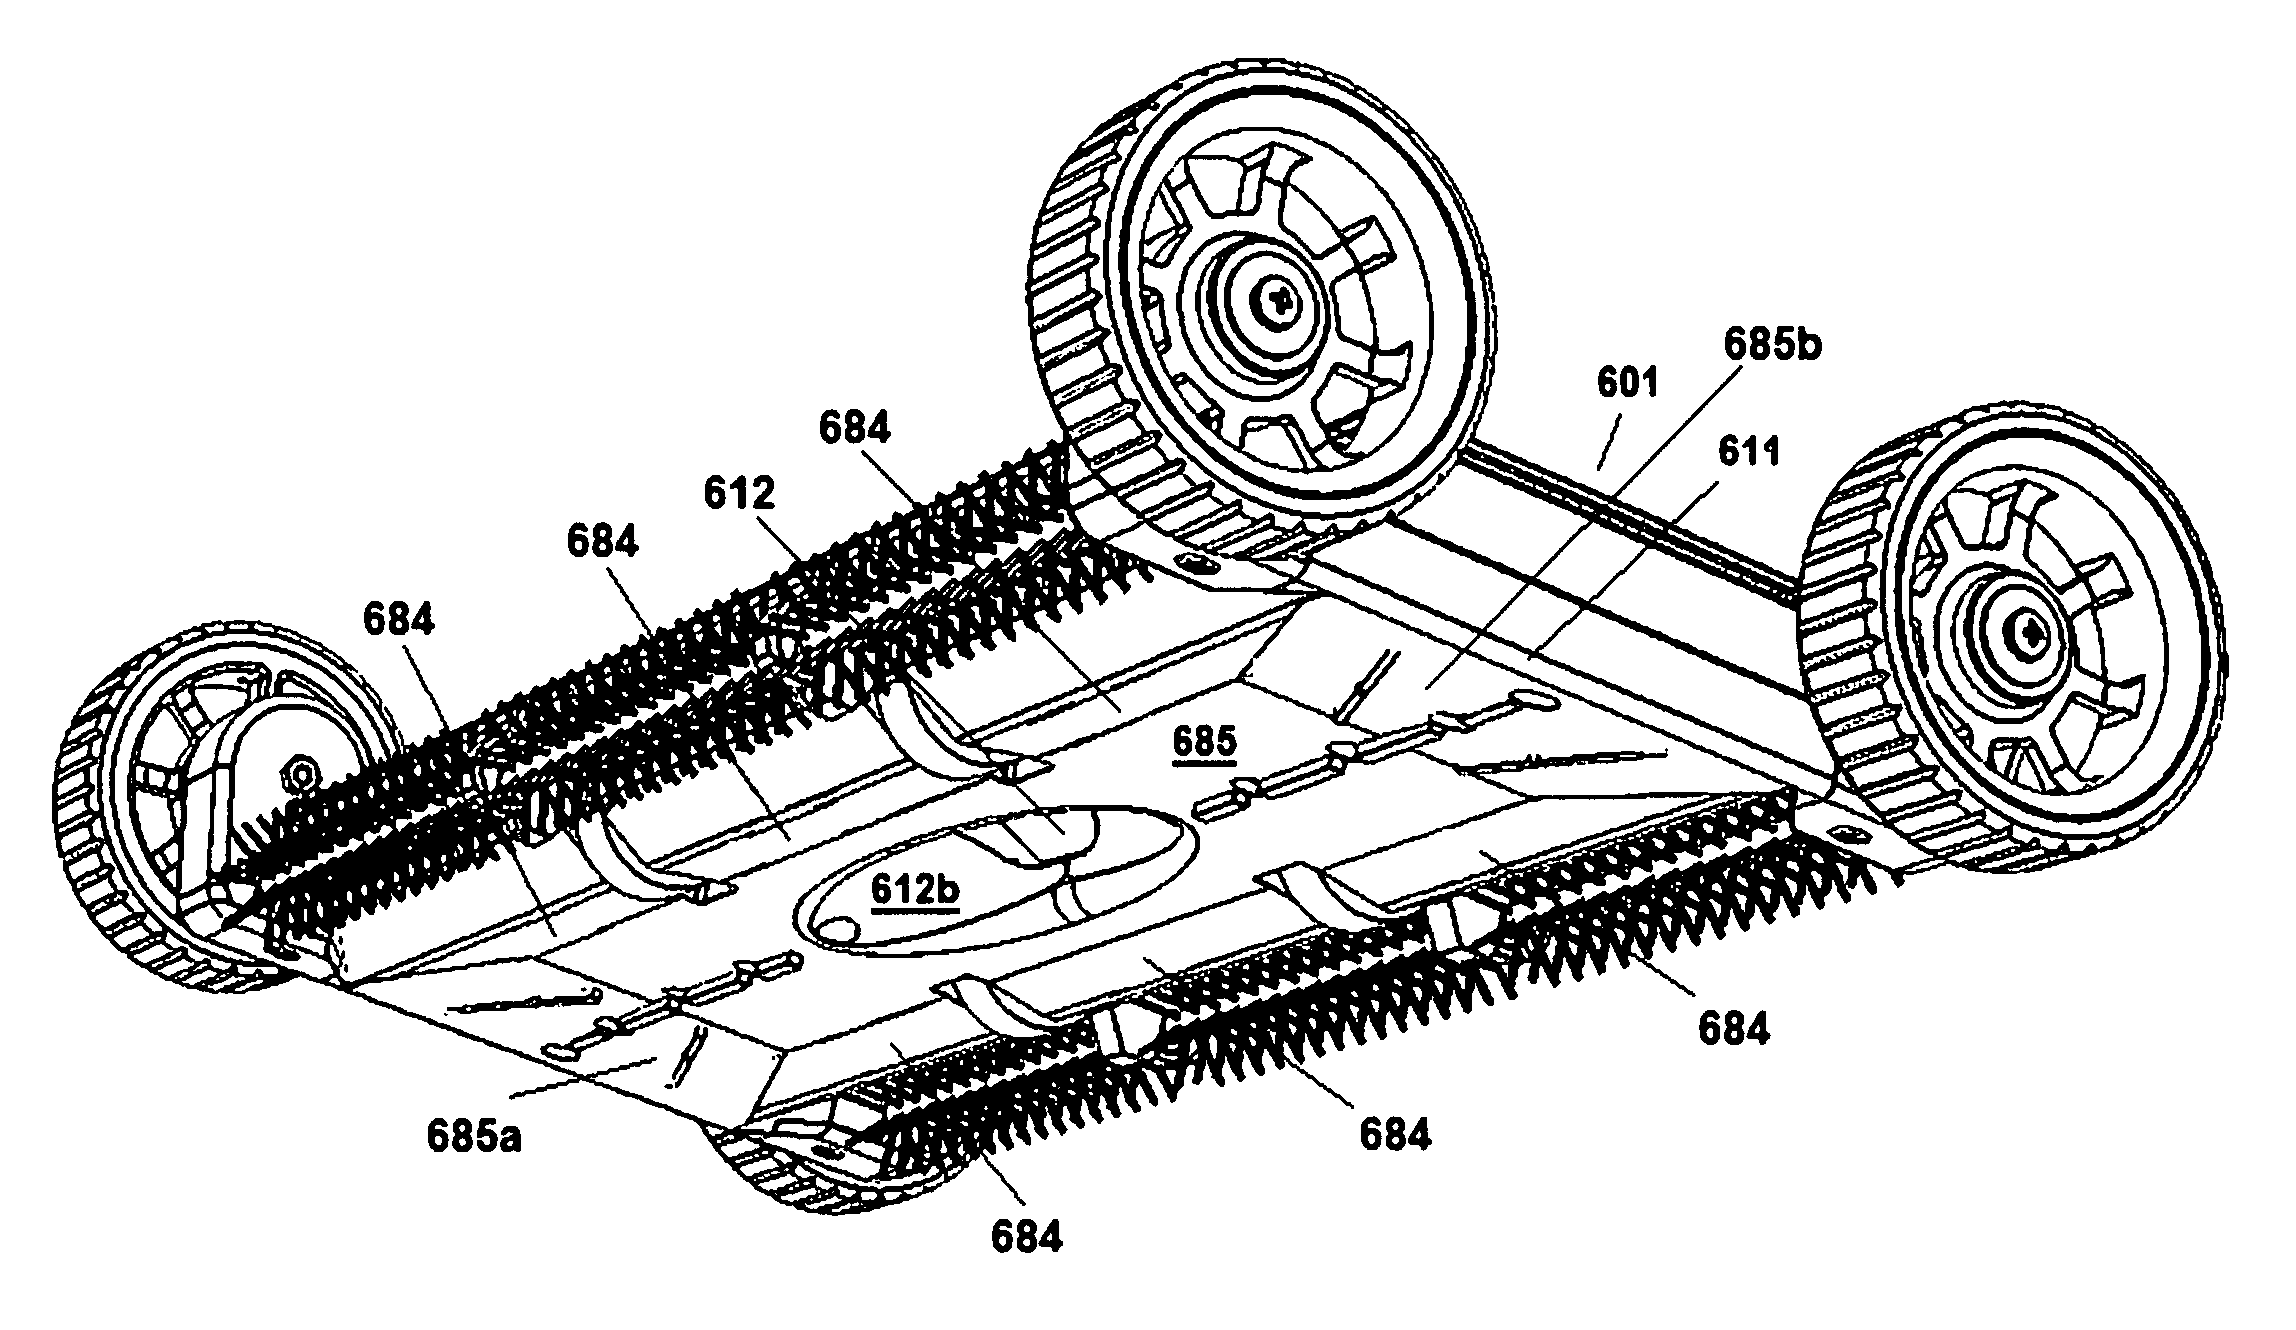 Pool cleaning device with improved bottom topography